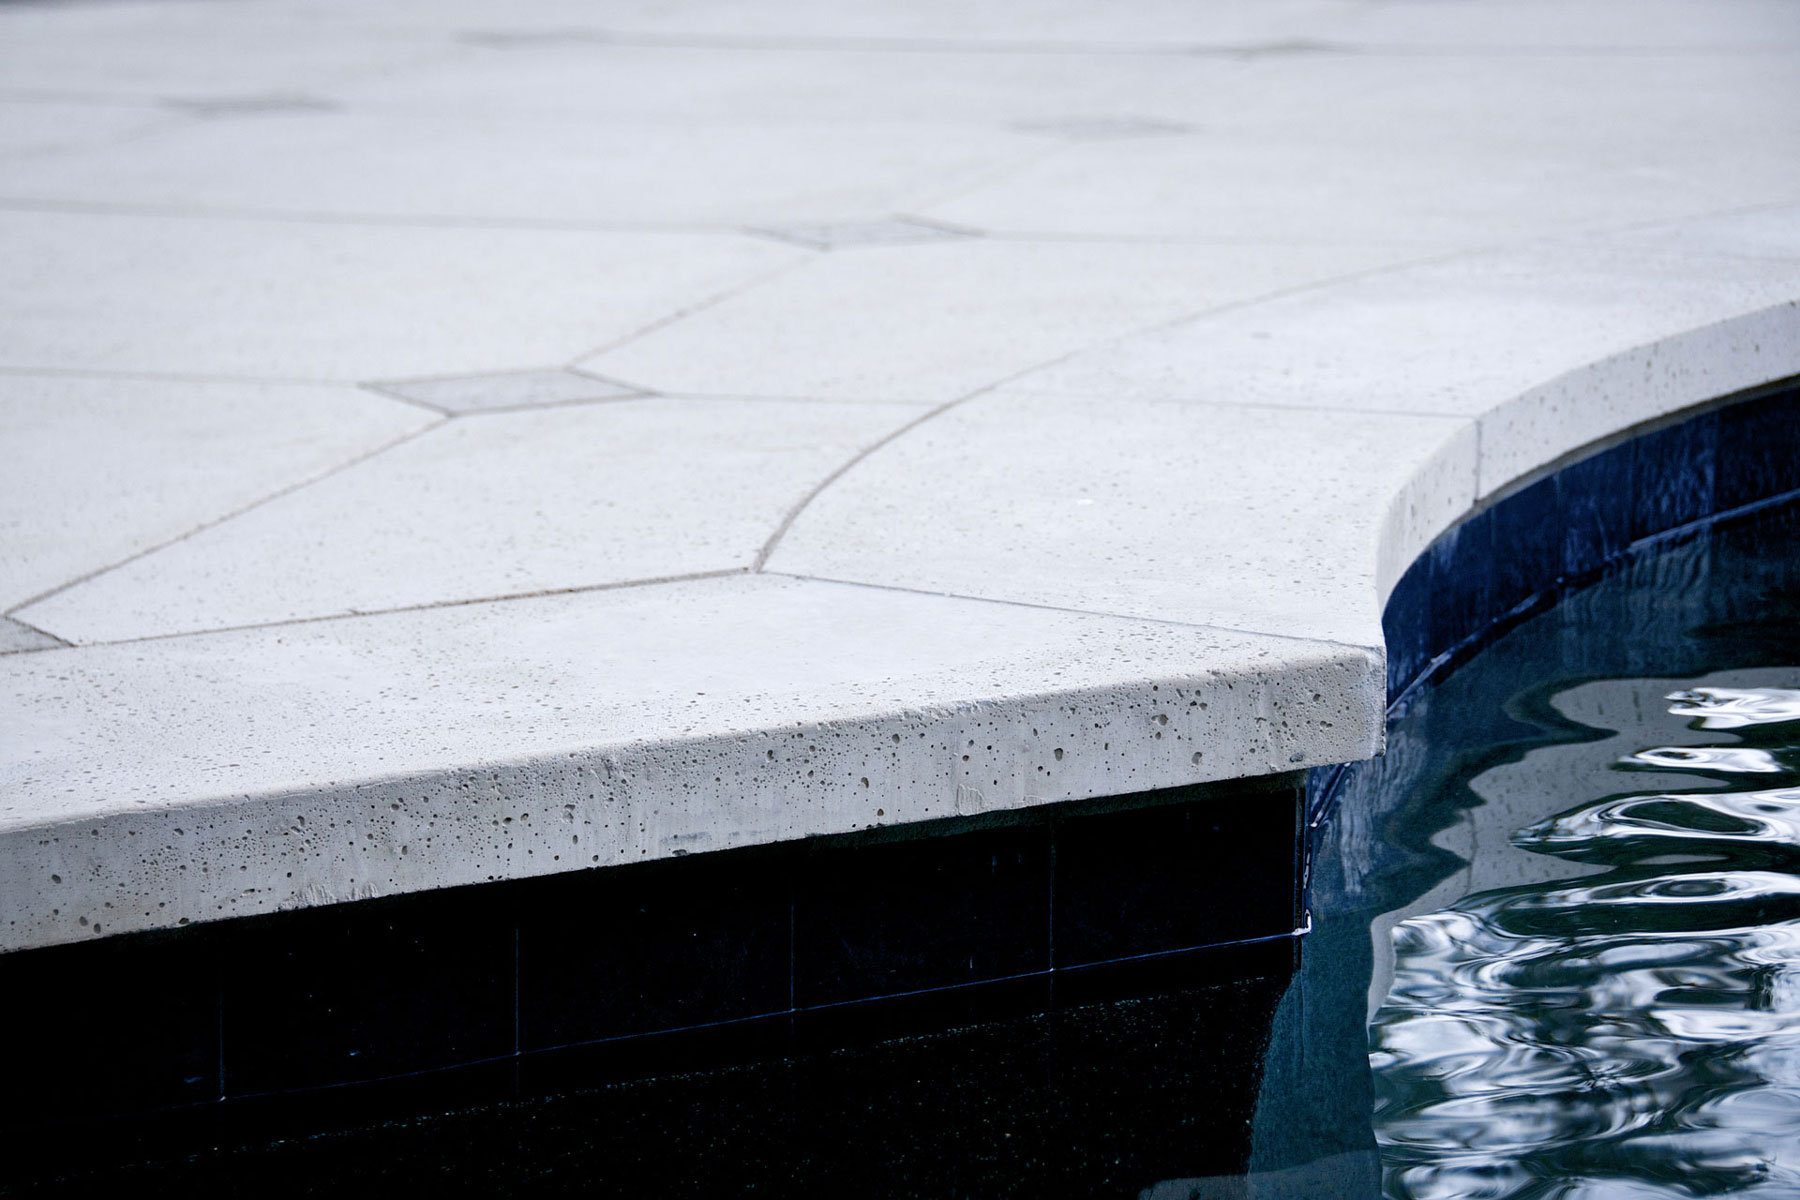 The pool coping tiles are smoothed for comfort, but still have naturalistic stone texture